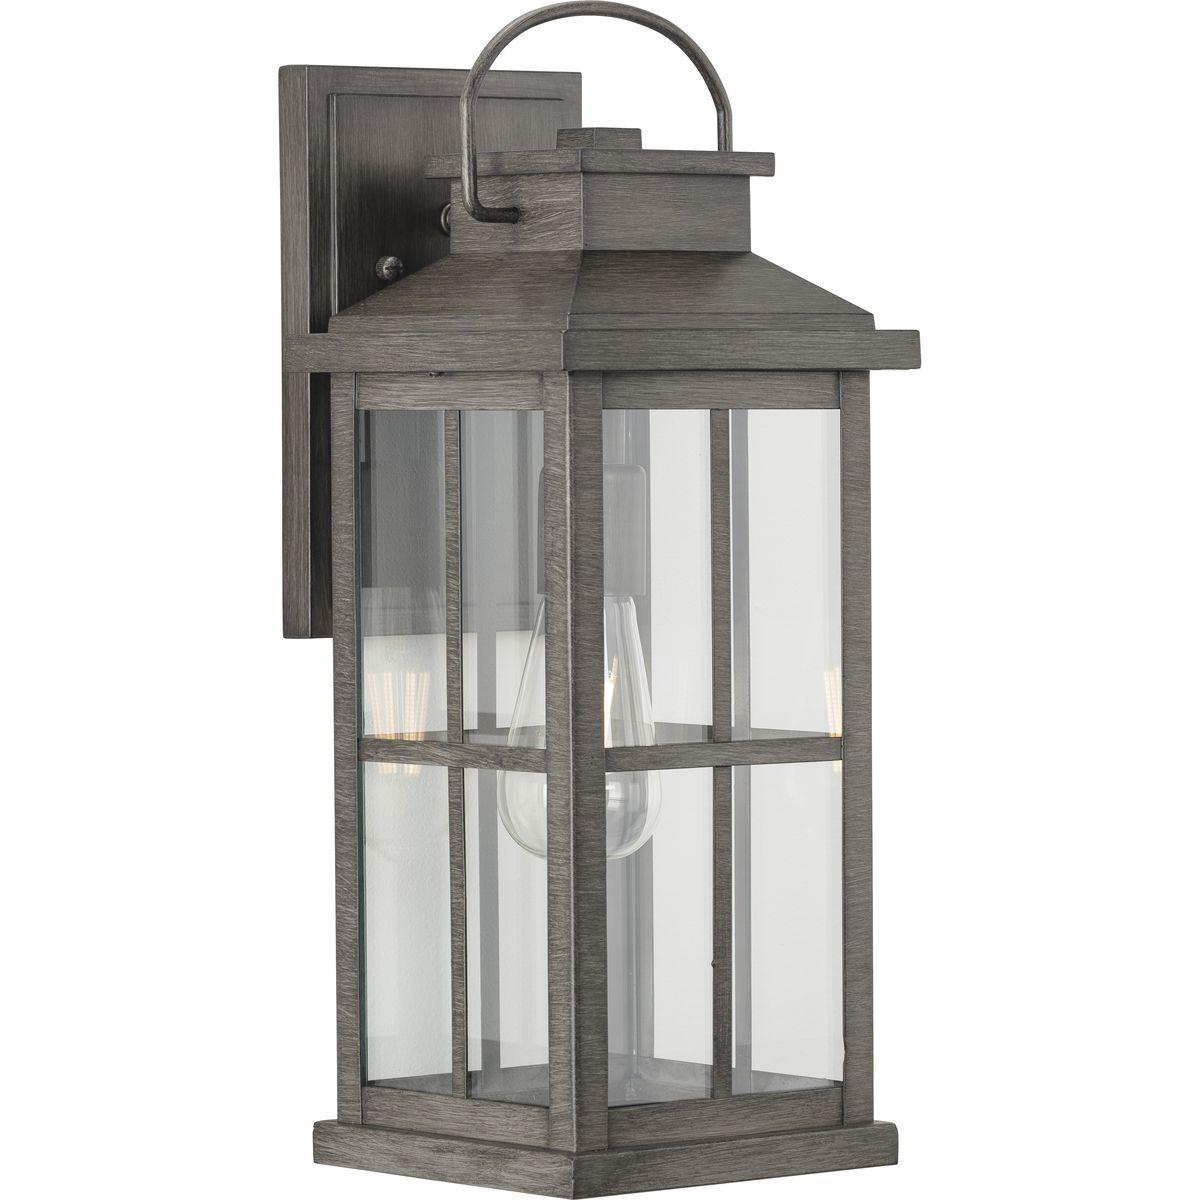 Hubbell P560266-103 Cultivate a timeless aesthetic with the Williamston Collection 1-Light Clear Glass Antique Pewter Farmhouse Large Wall Lantern Light. A light source glows from within clear glass panes beneath a traditional windowpane design for classic character. The elo